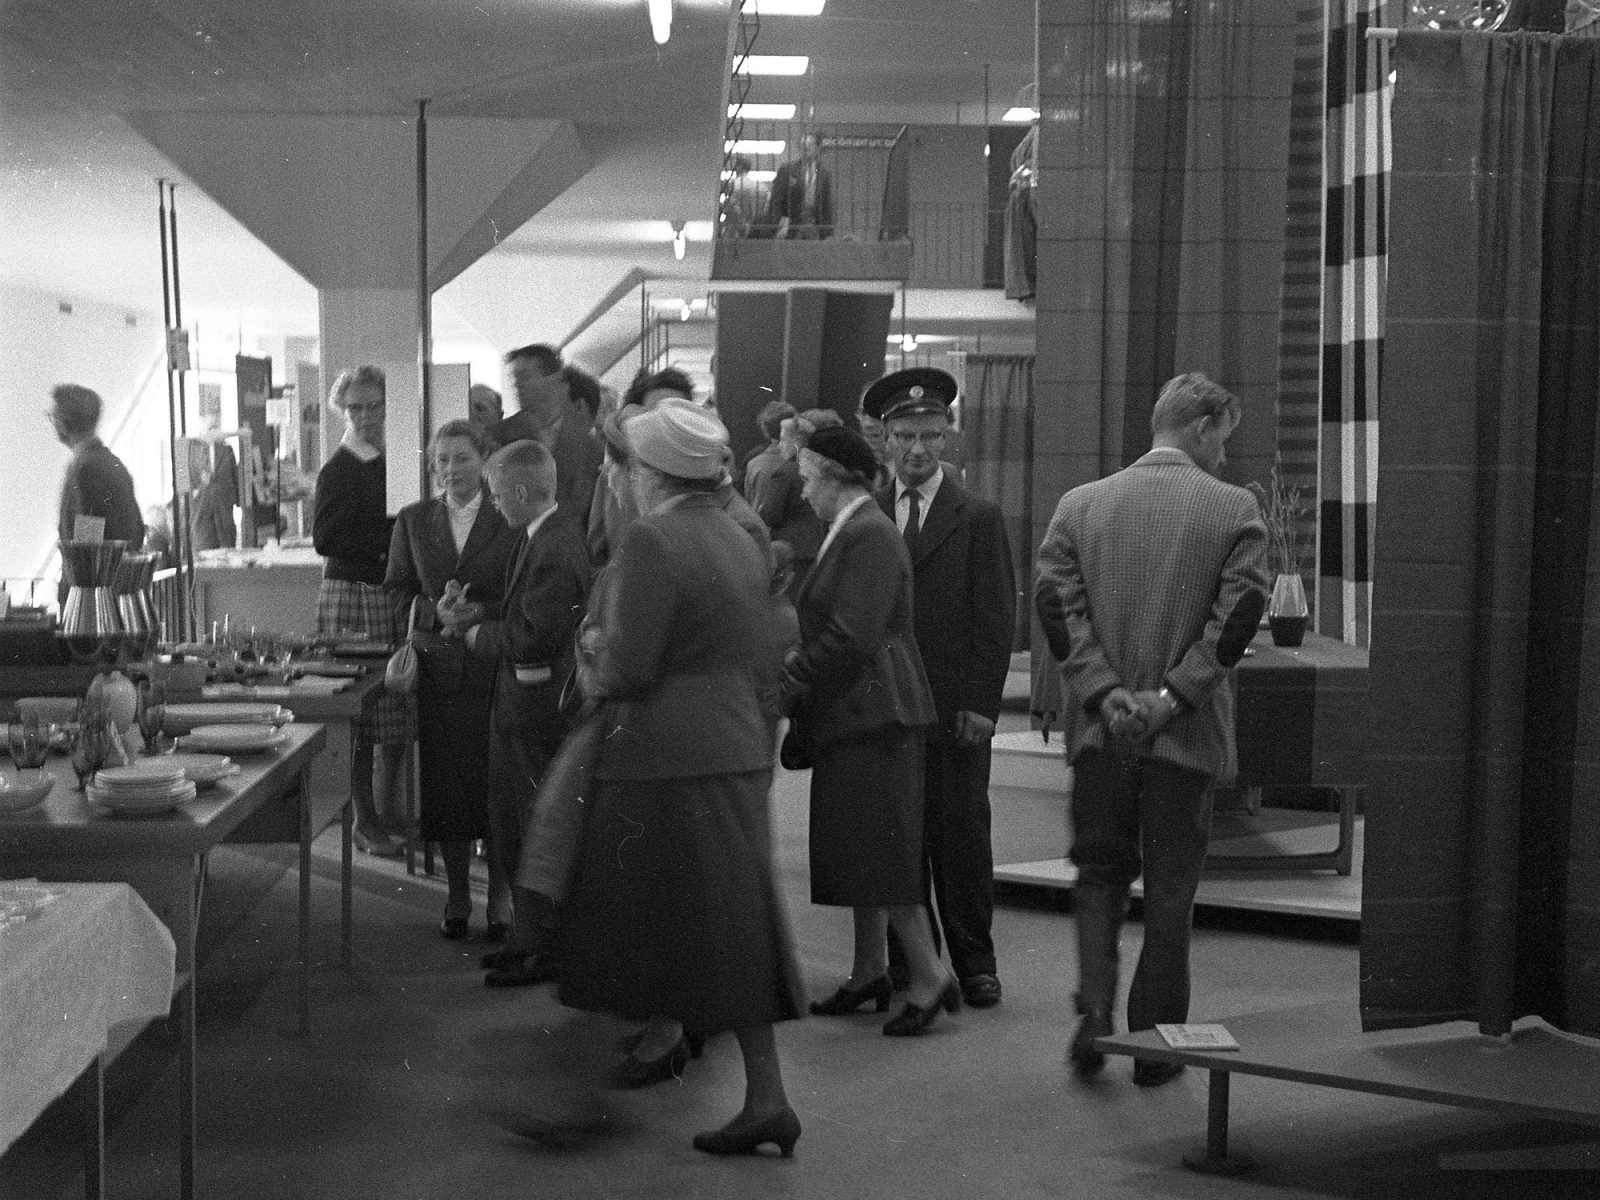 People mingle and look at furniture on display, the women wear 1950s dresses or skirt suits, the men wear suits.